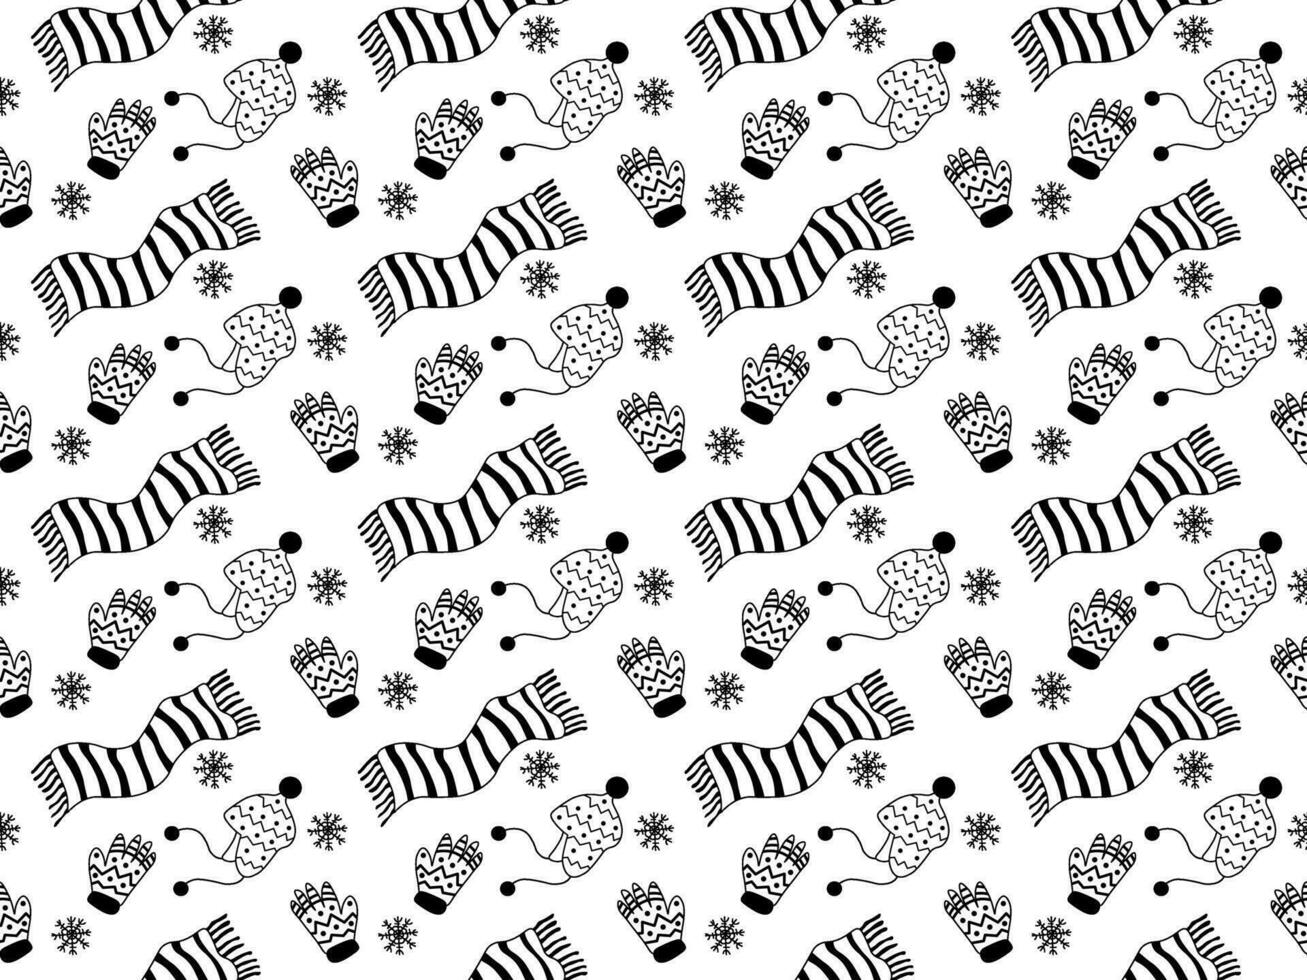 seamless black and white doodle pattern with winter clothes. Bobble hat, mittens and scarf vector